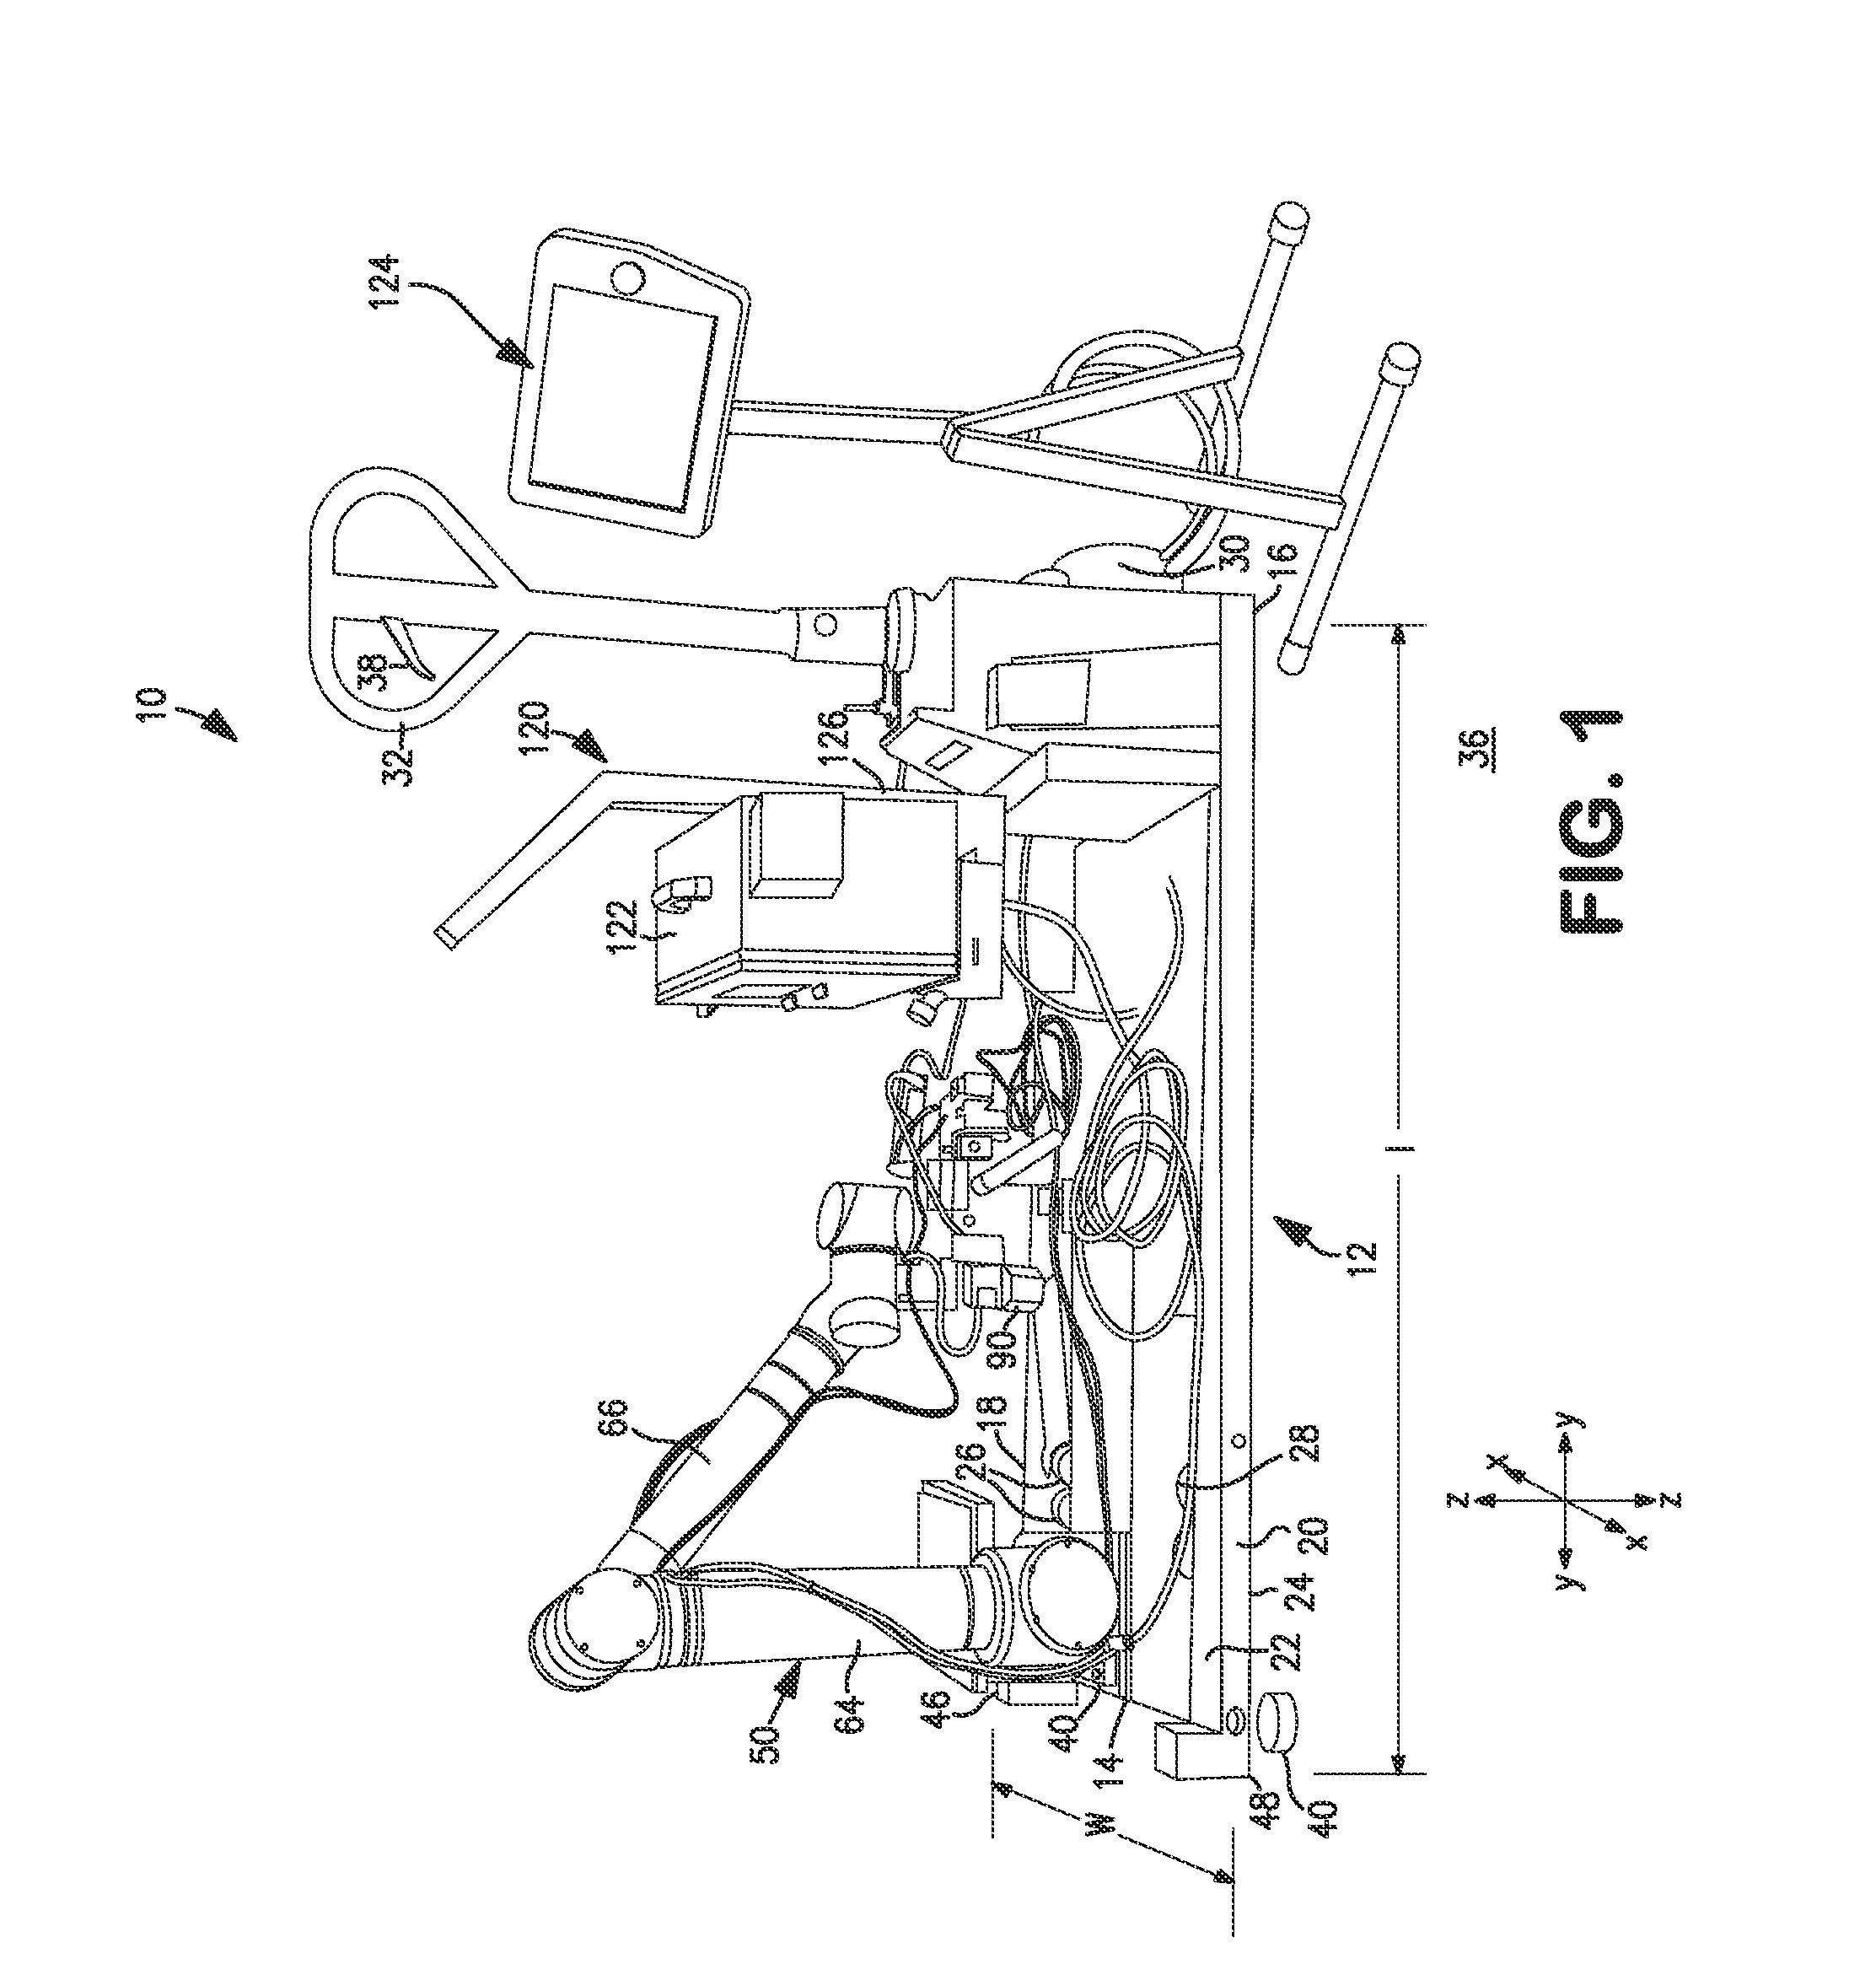 Machine for aligning items in a pattern and a method of use